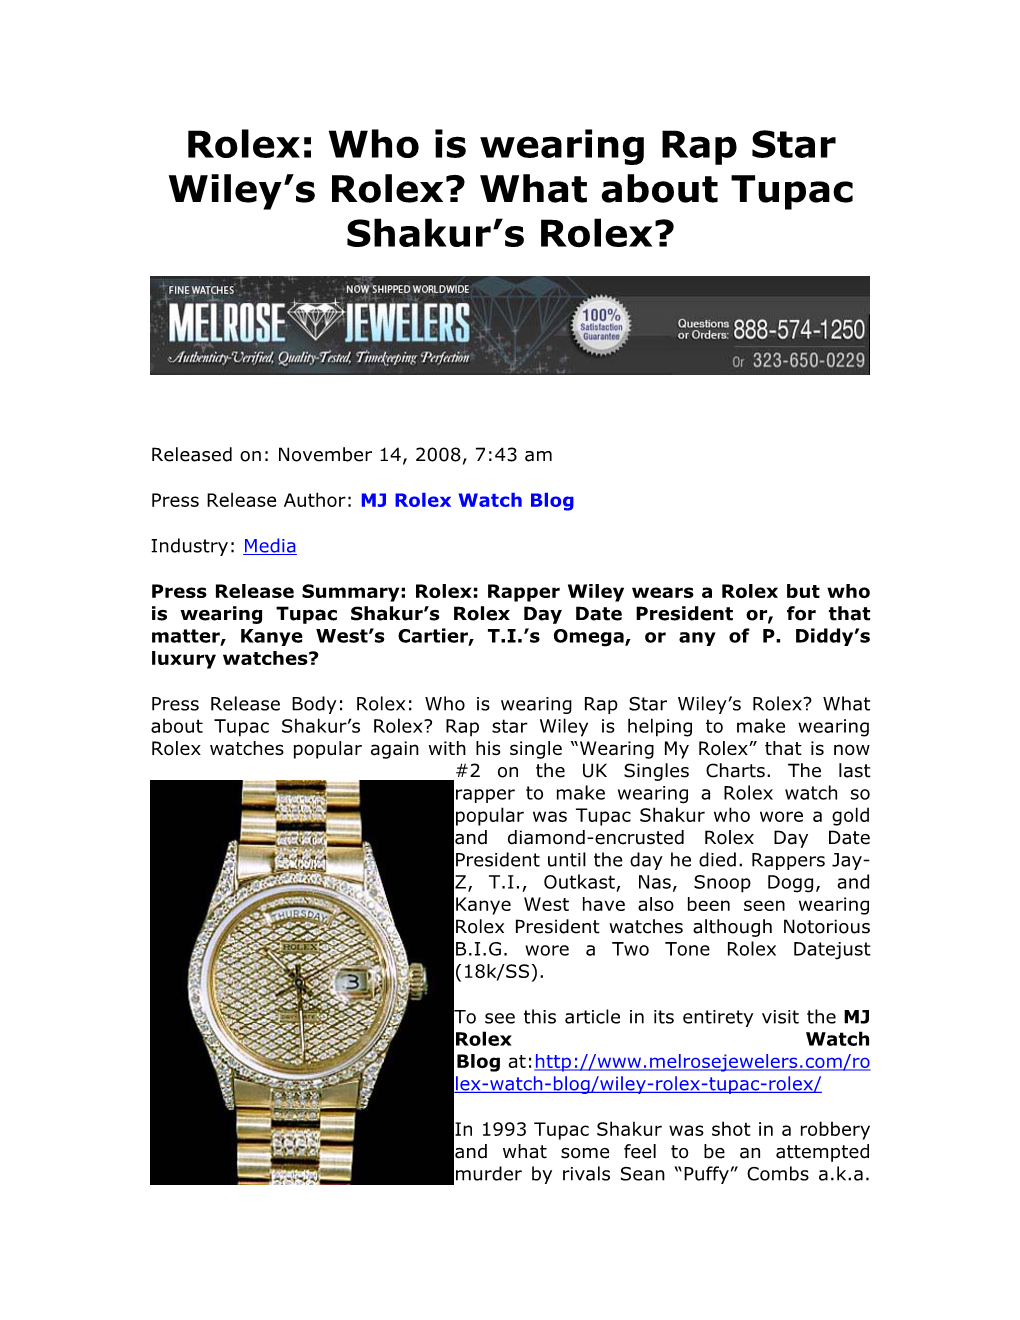 Who Is Wearing Rap Star Wiley's Rolex? What About Tupac Shakur's